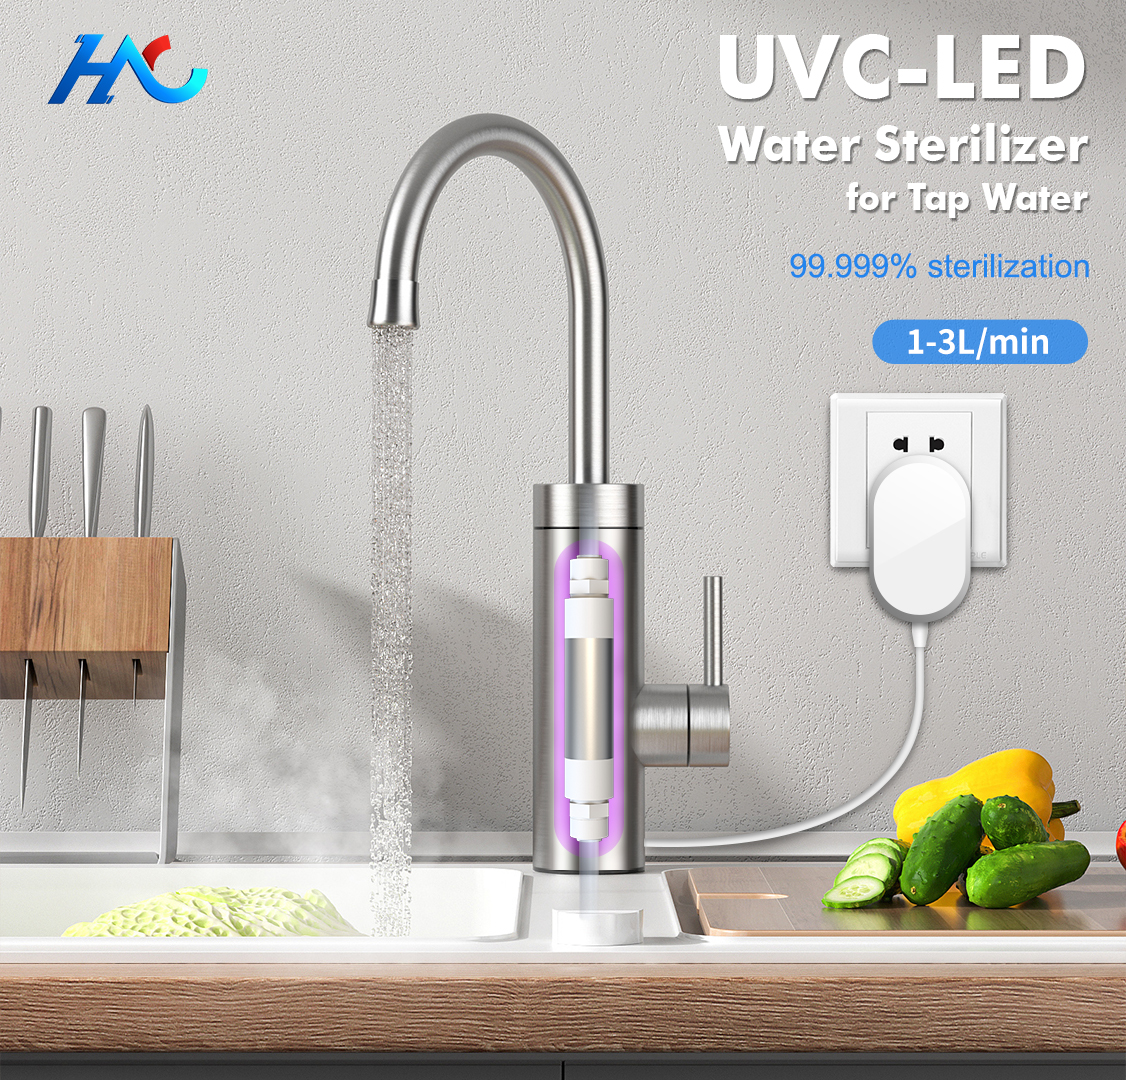 WHY UVC-LED PURIFIED WATER ARE YOUR BBF AT HOME, SAFEGUARD IN THE WILD